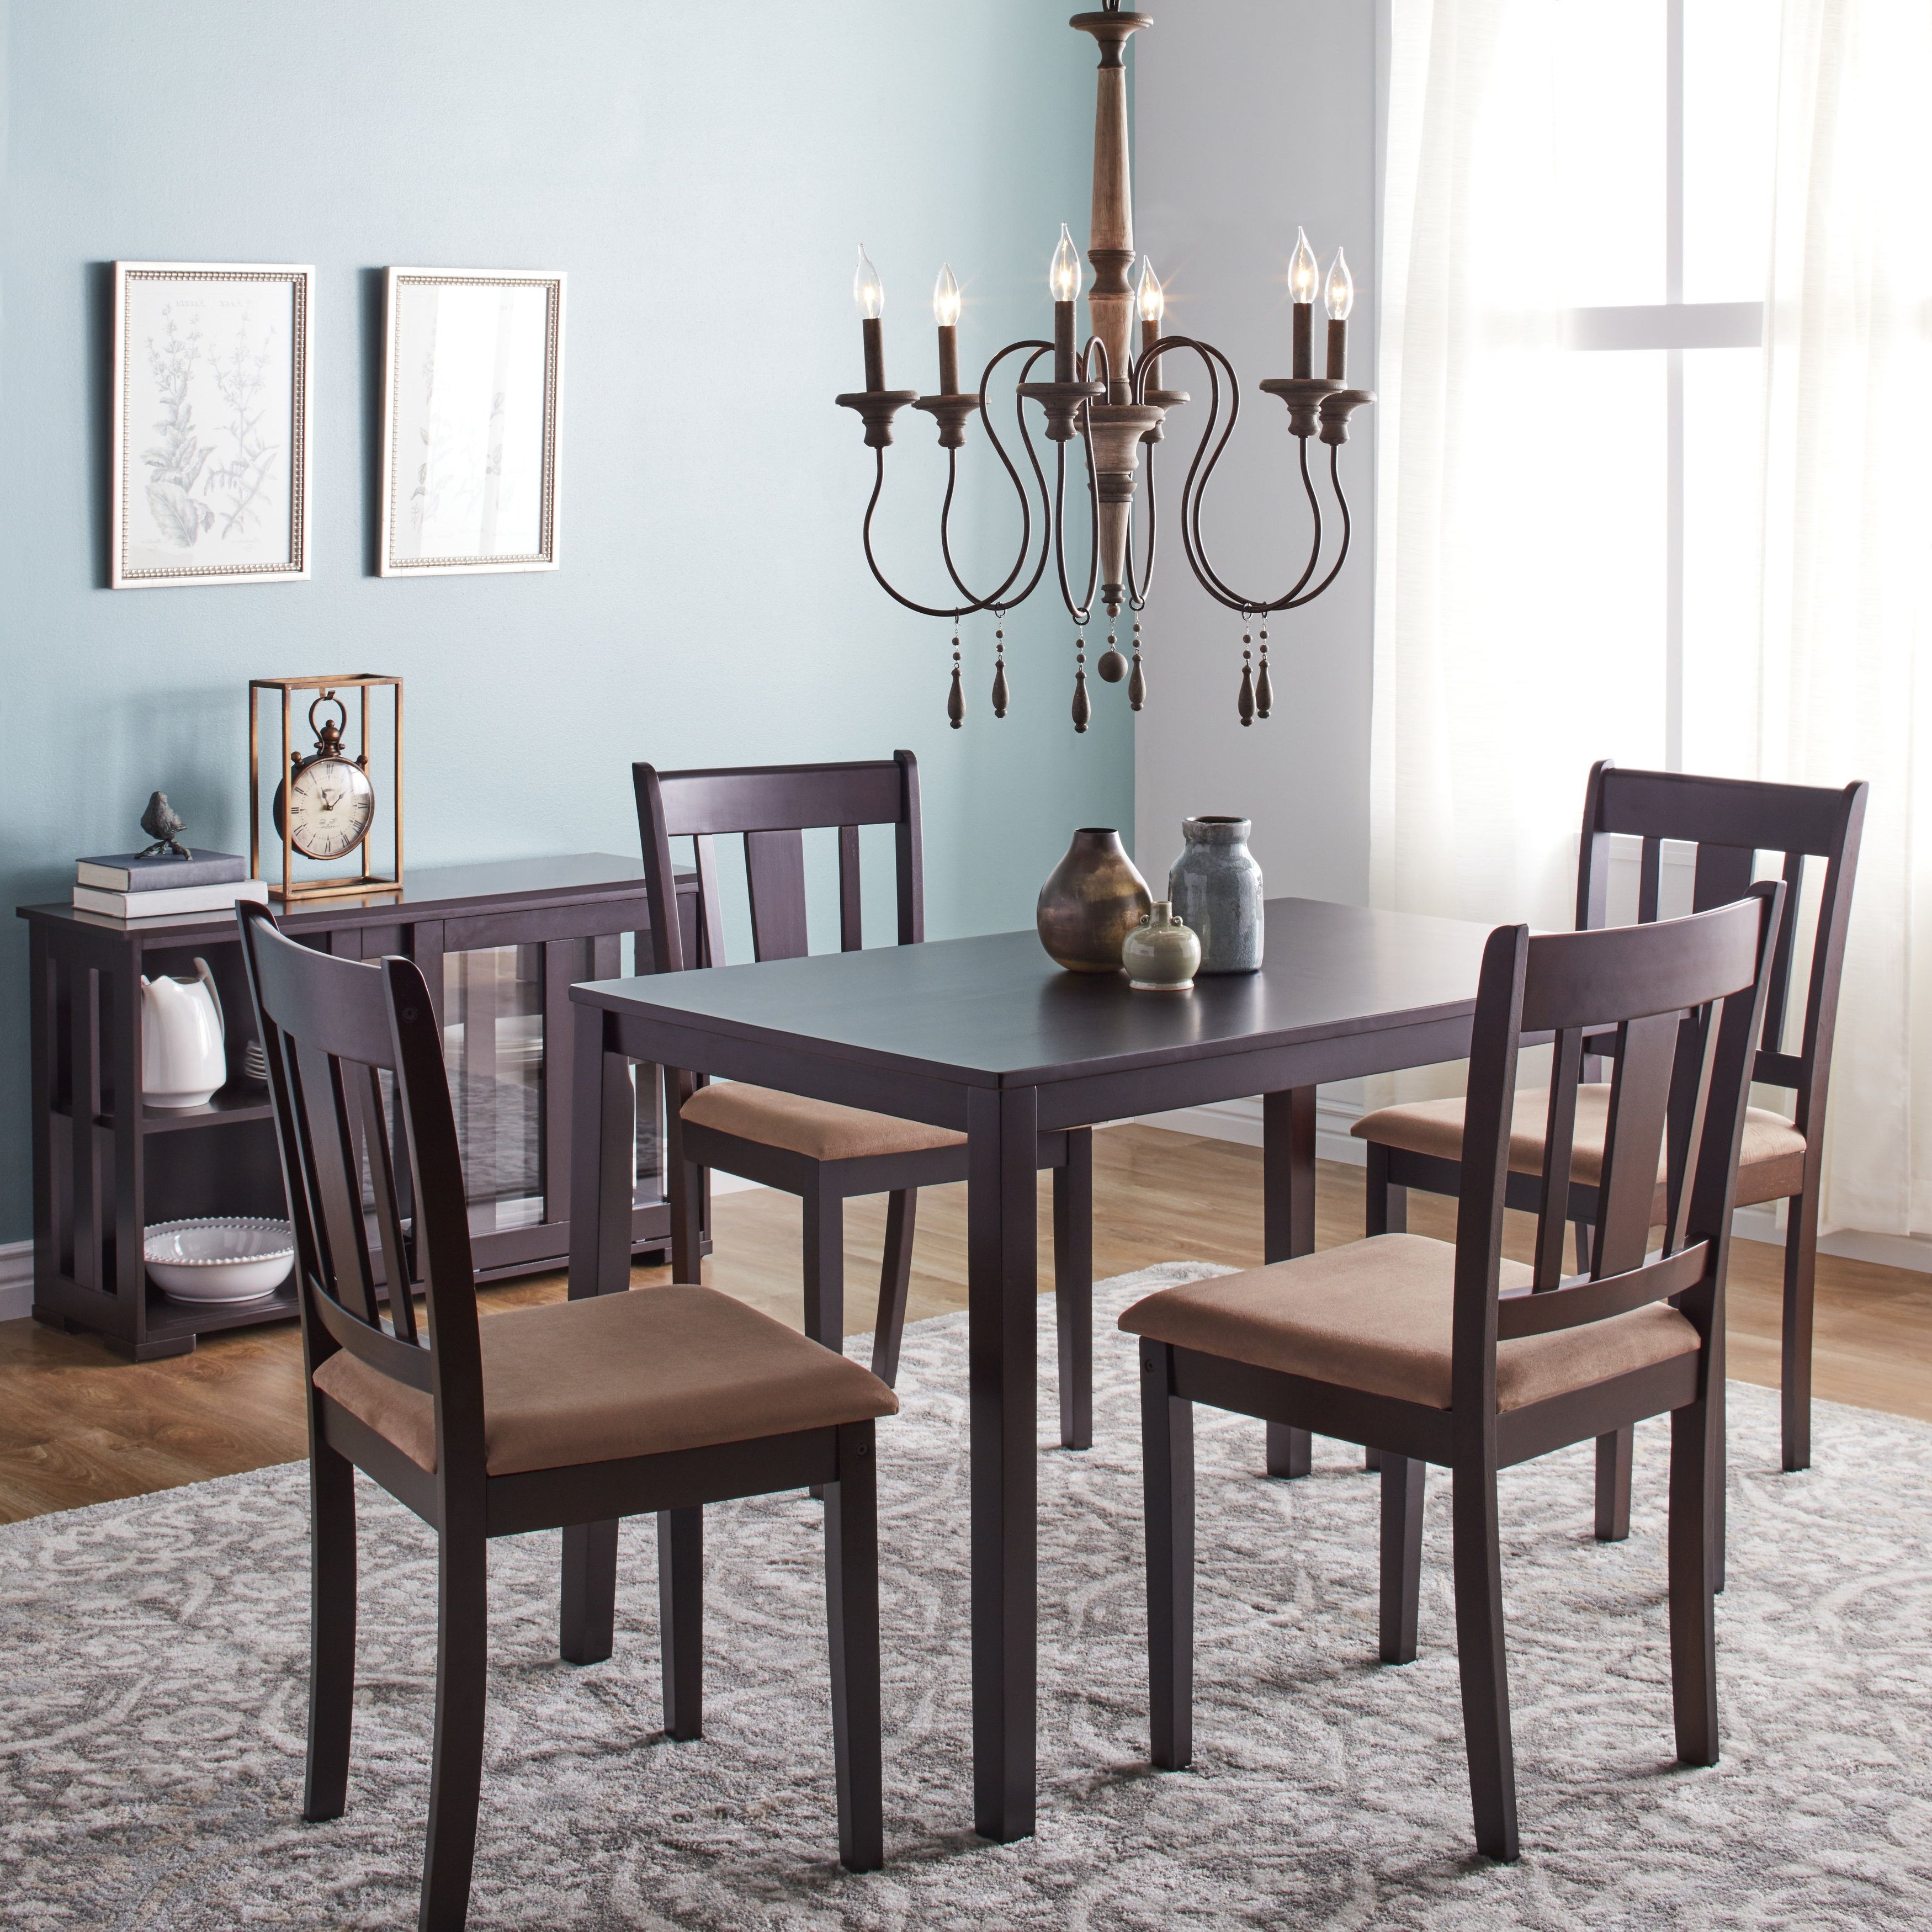 Buy 5 Piece Sets Kitchen & Dining Room Sets Online At Overstock Intended For Well Known Bedfo 3 Piece Dining Sets (View 8 of 20)